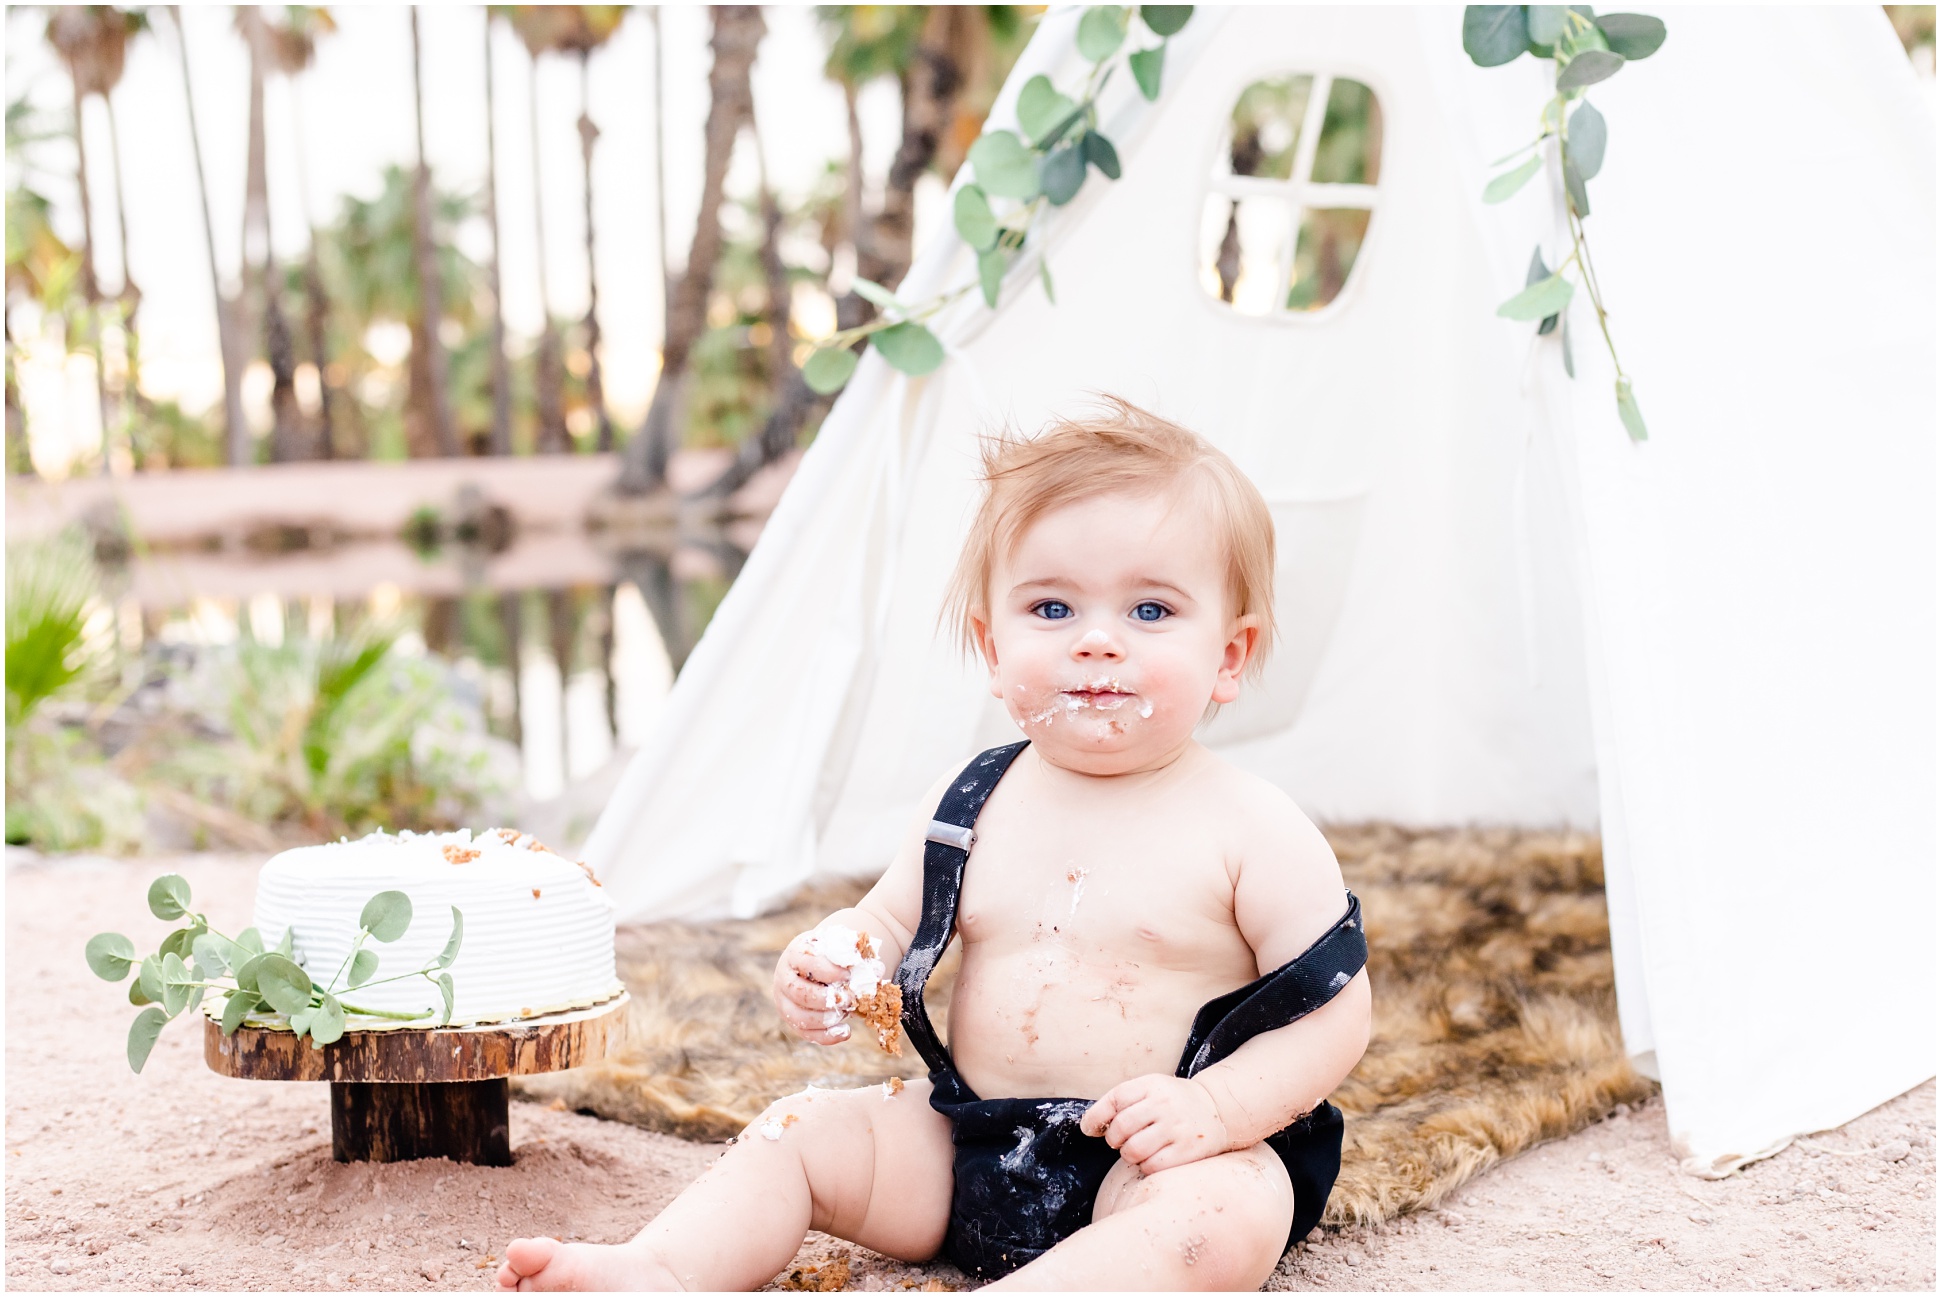 One Year old wearing black diaper cover and suspenders